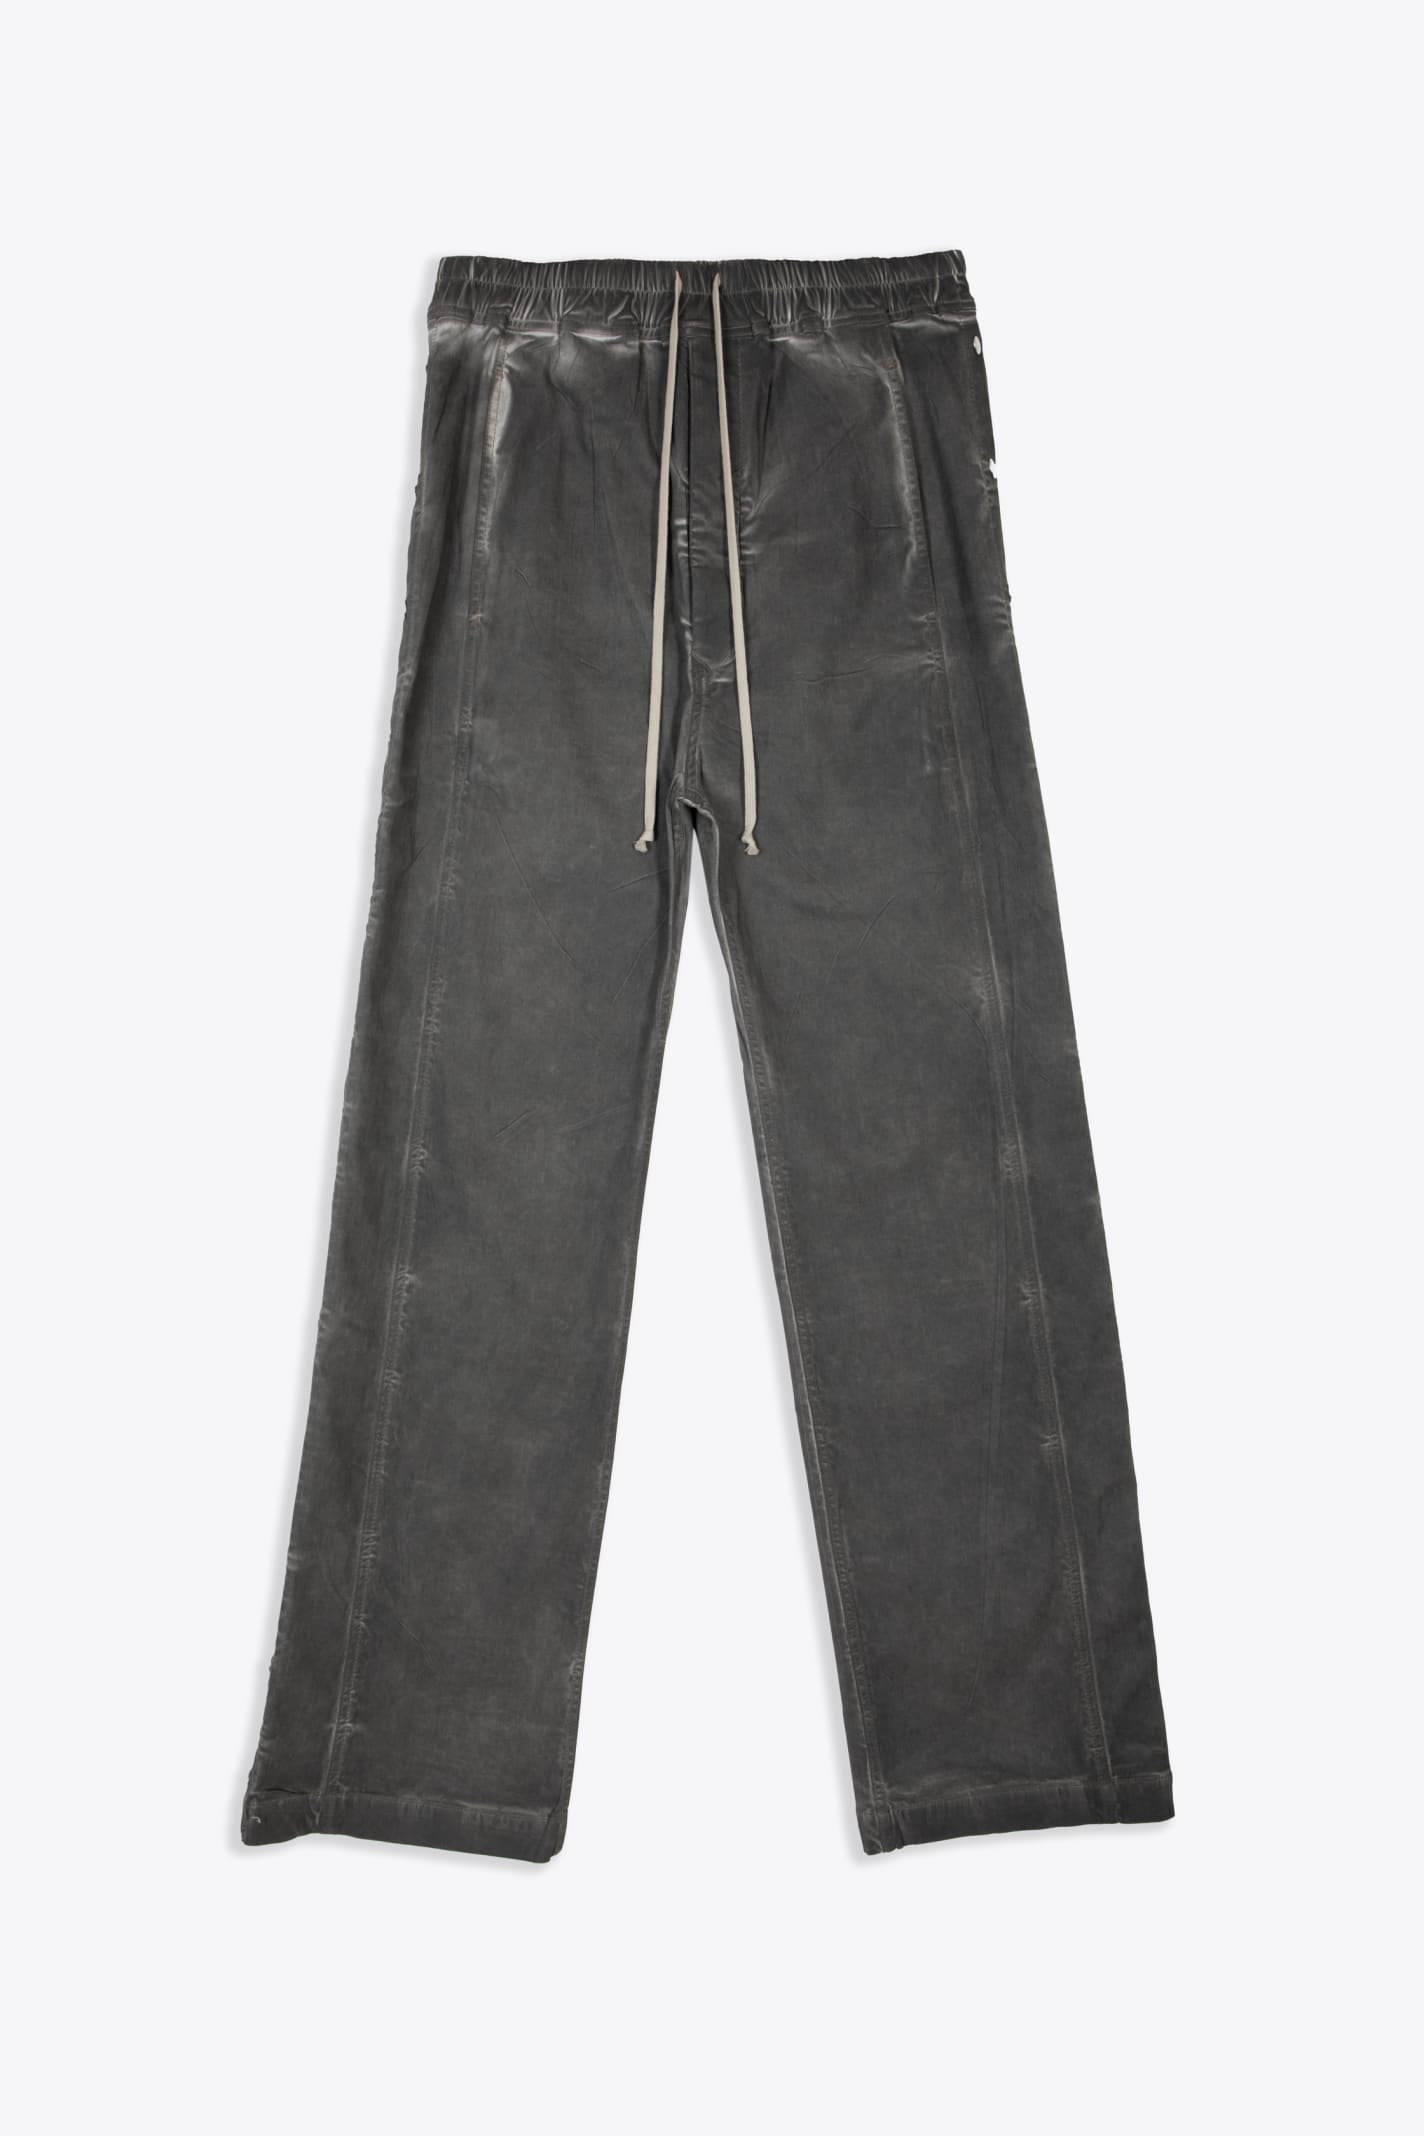 Drkshdw Pusher Pants Dark Grey Waxed Cotton Pants With Side Snaps - Pusher Pants In Antracite